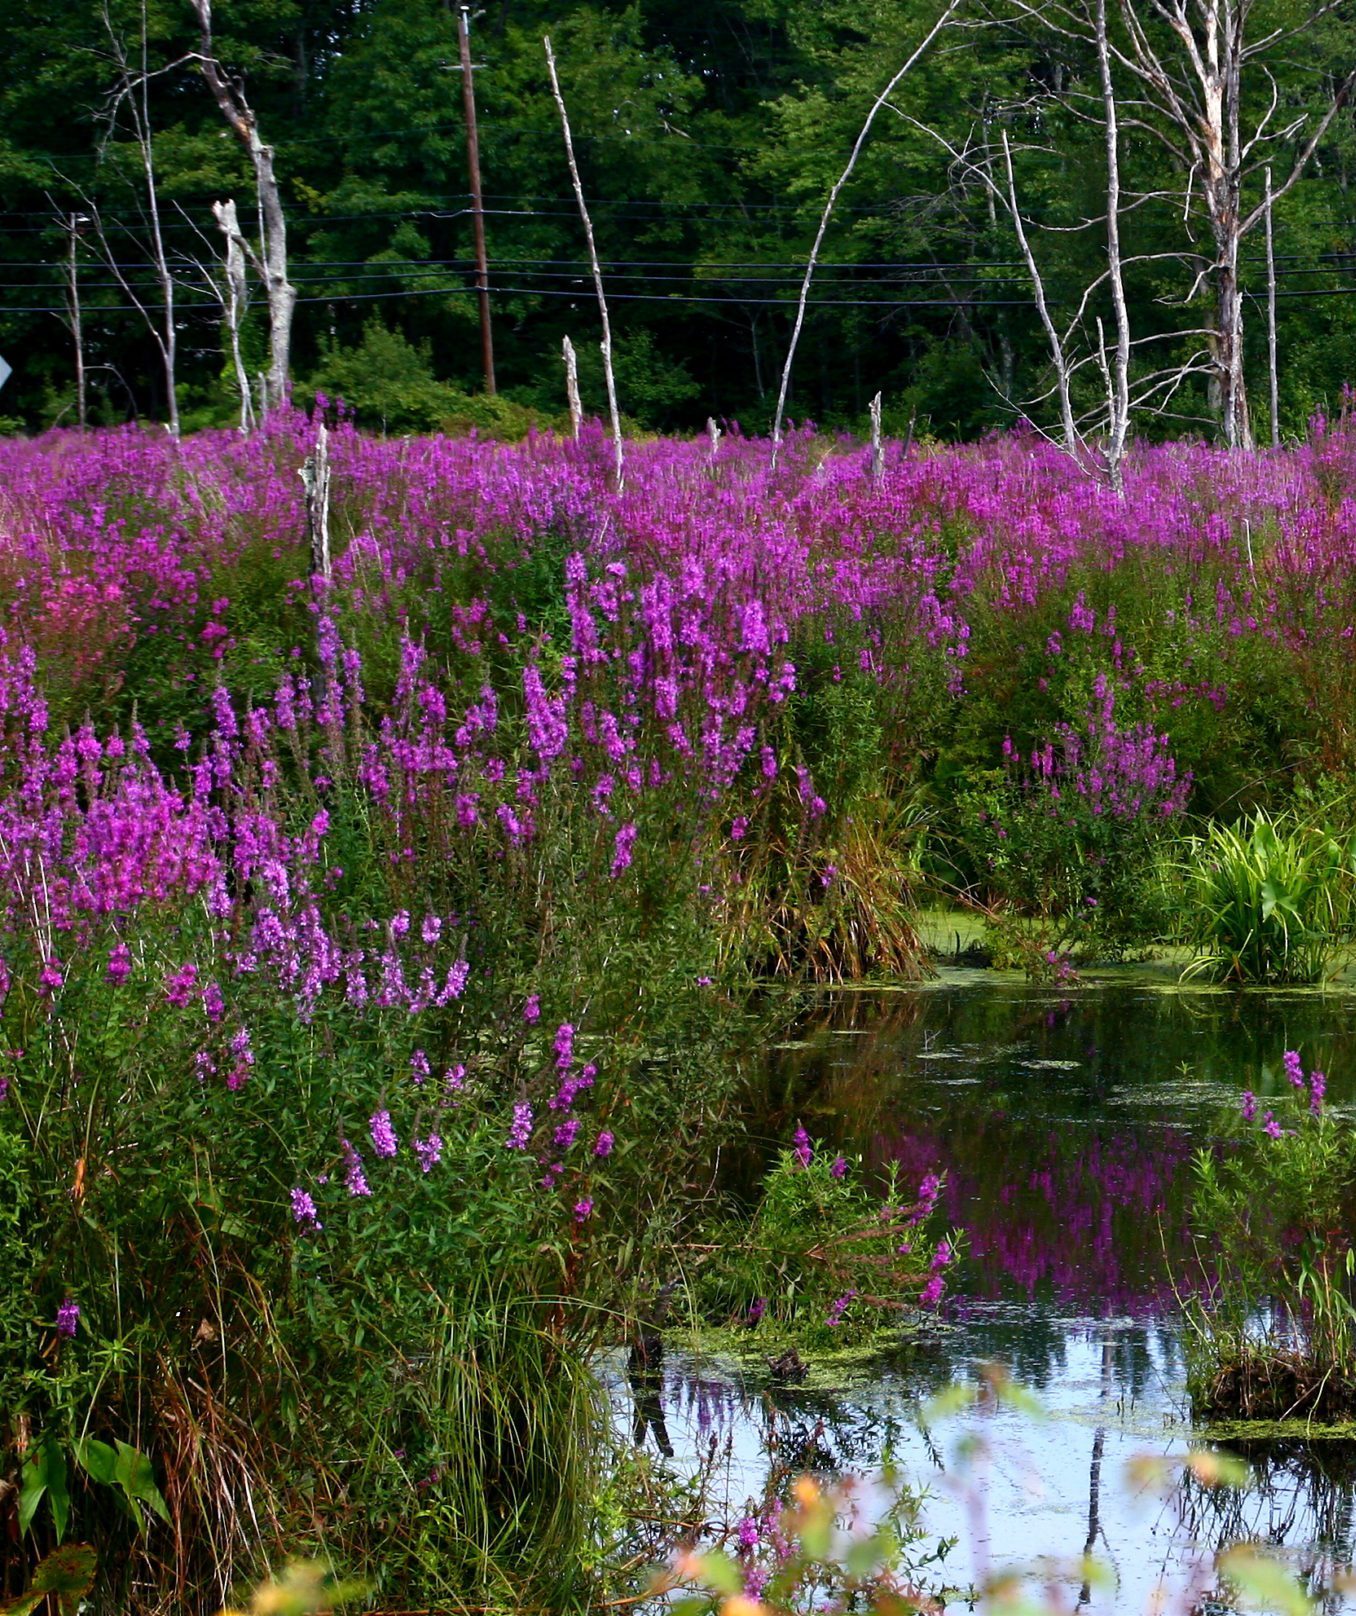 landscape of a pond surrounded by invasive purple loosestrife in bloom